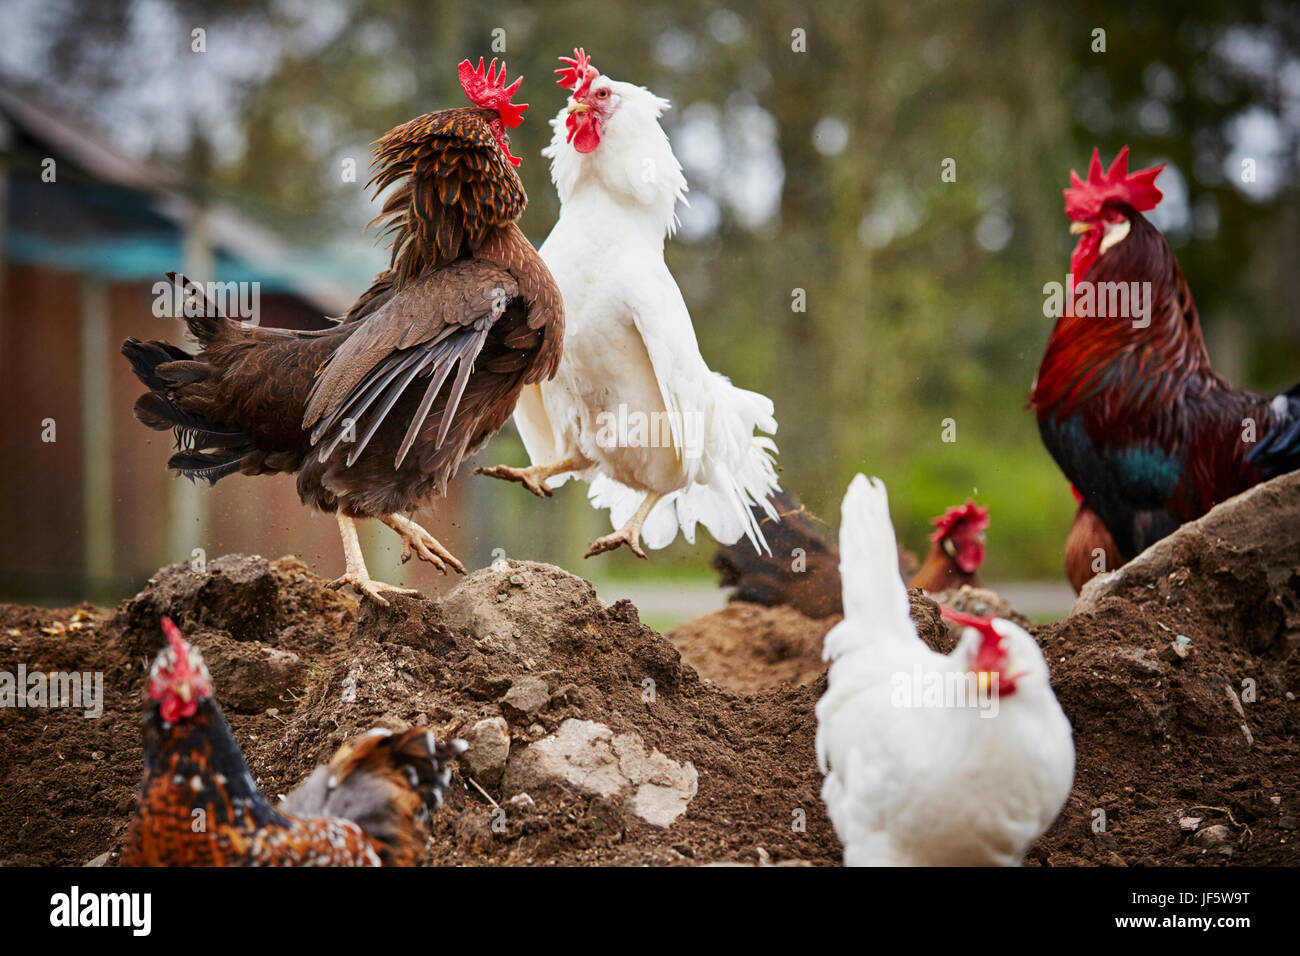 Fighting roosters Stock Photo